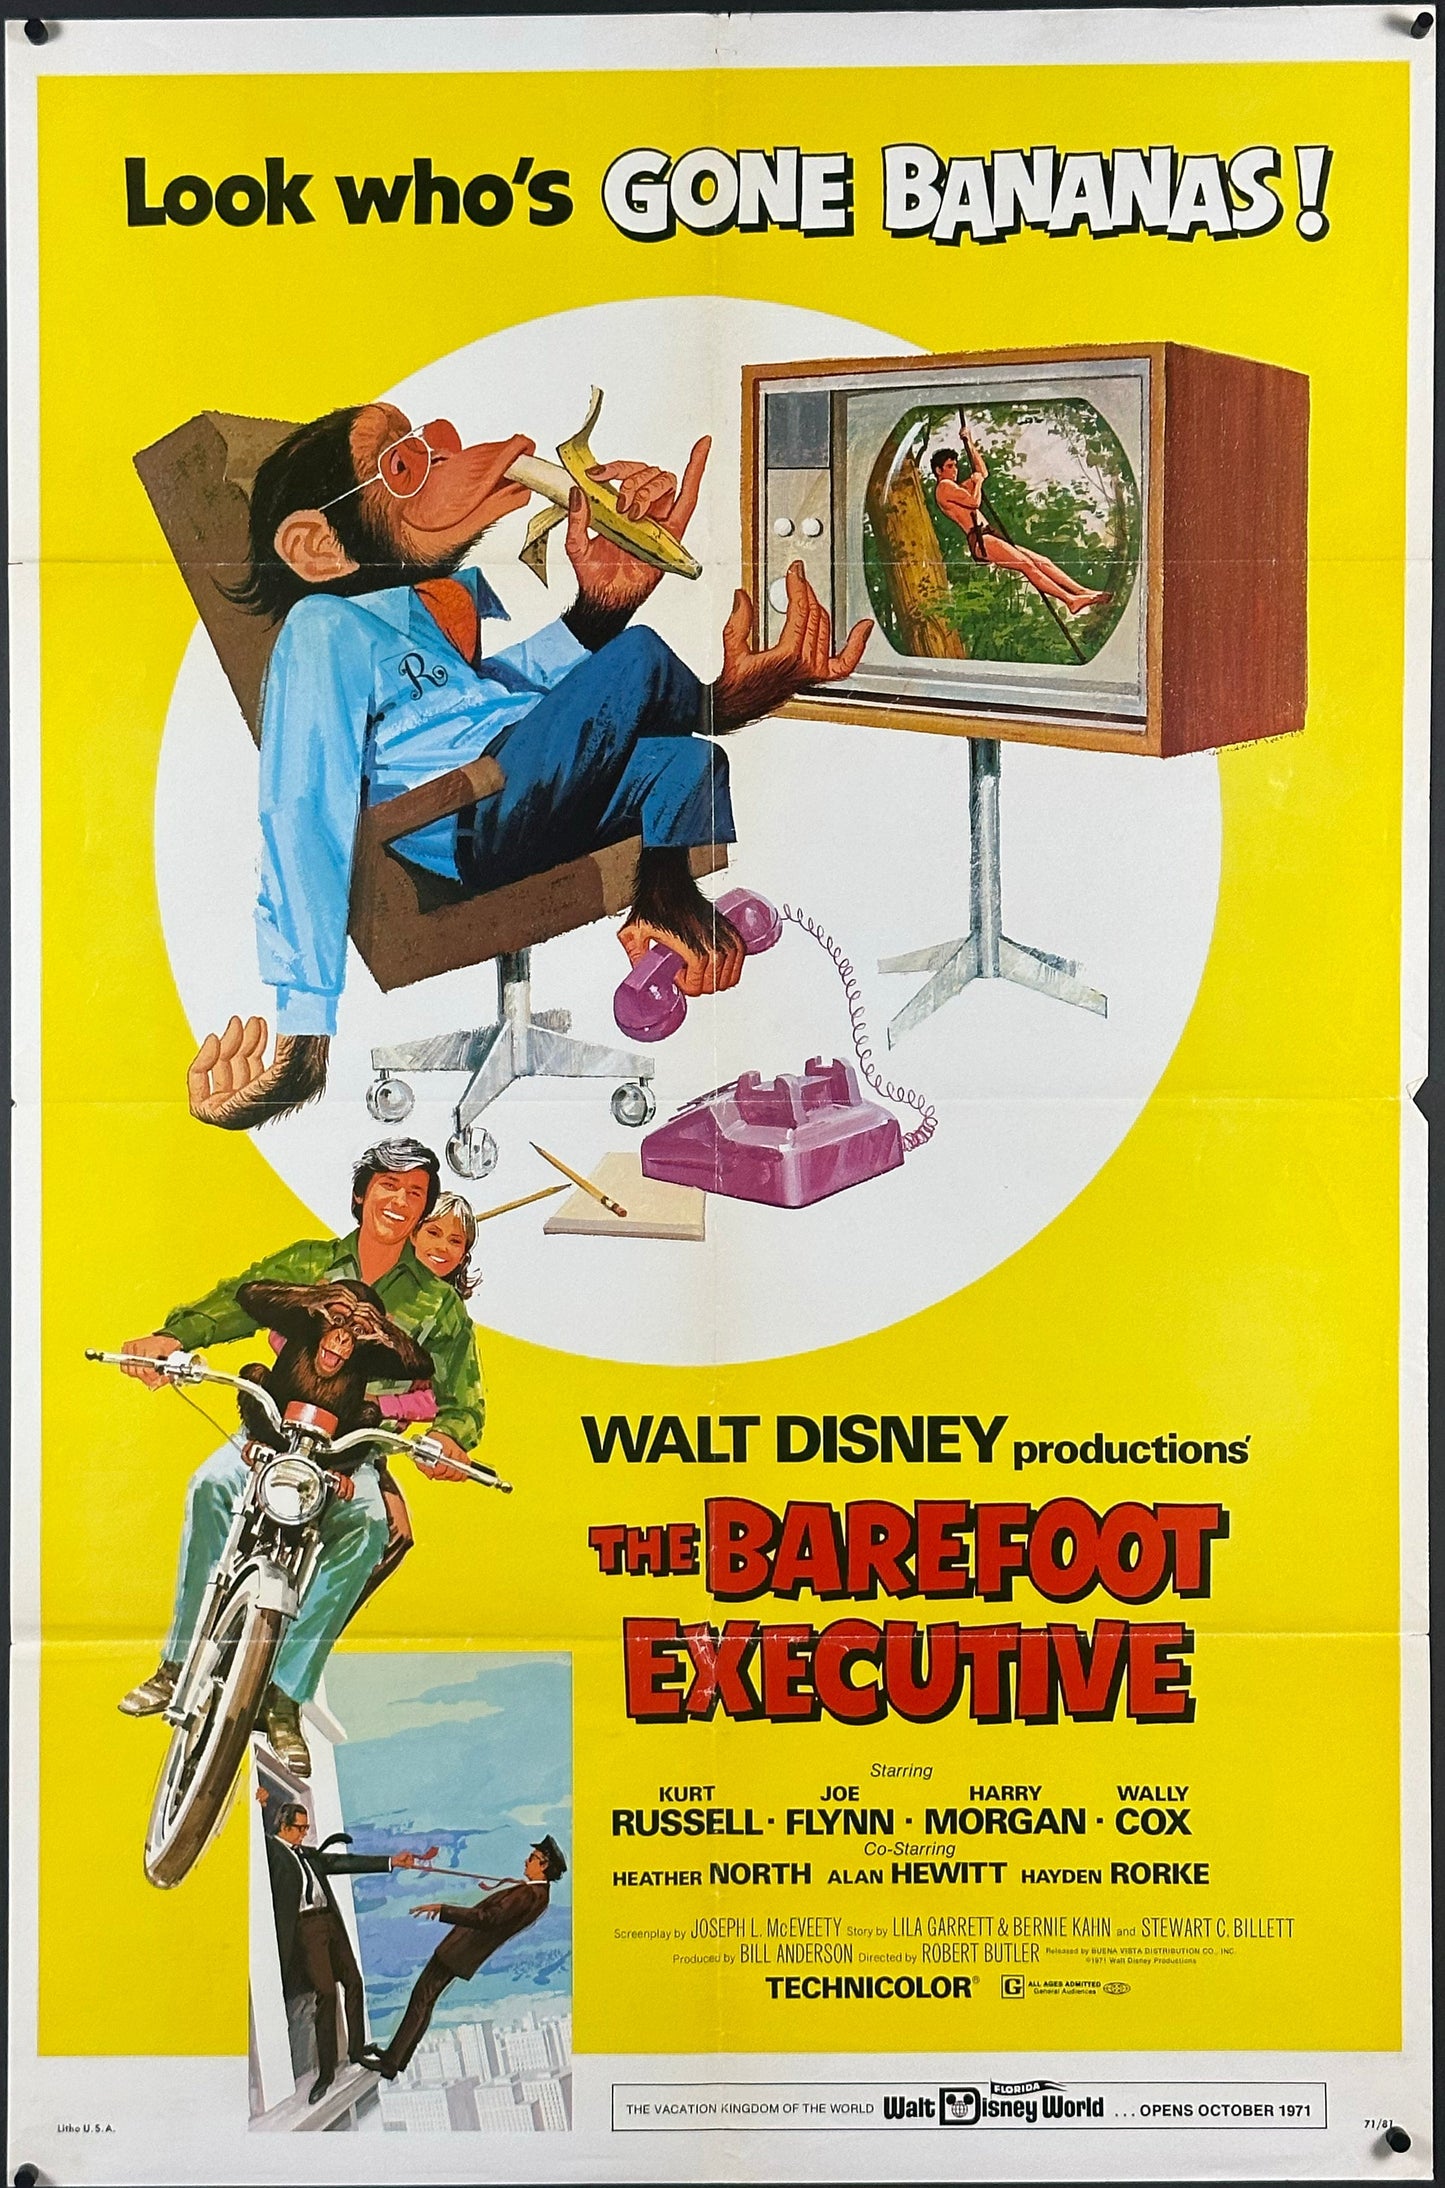 The Barefoot Executive - posterpalace.com